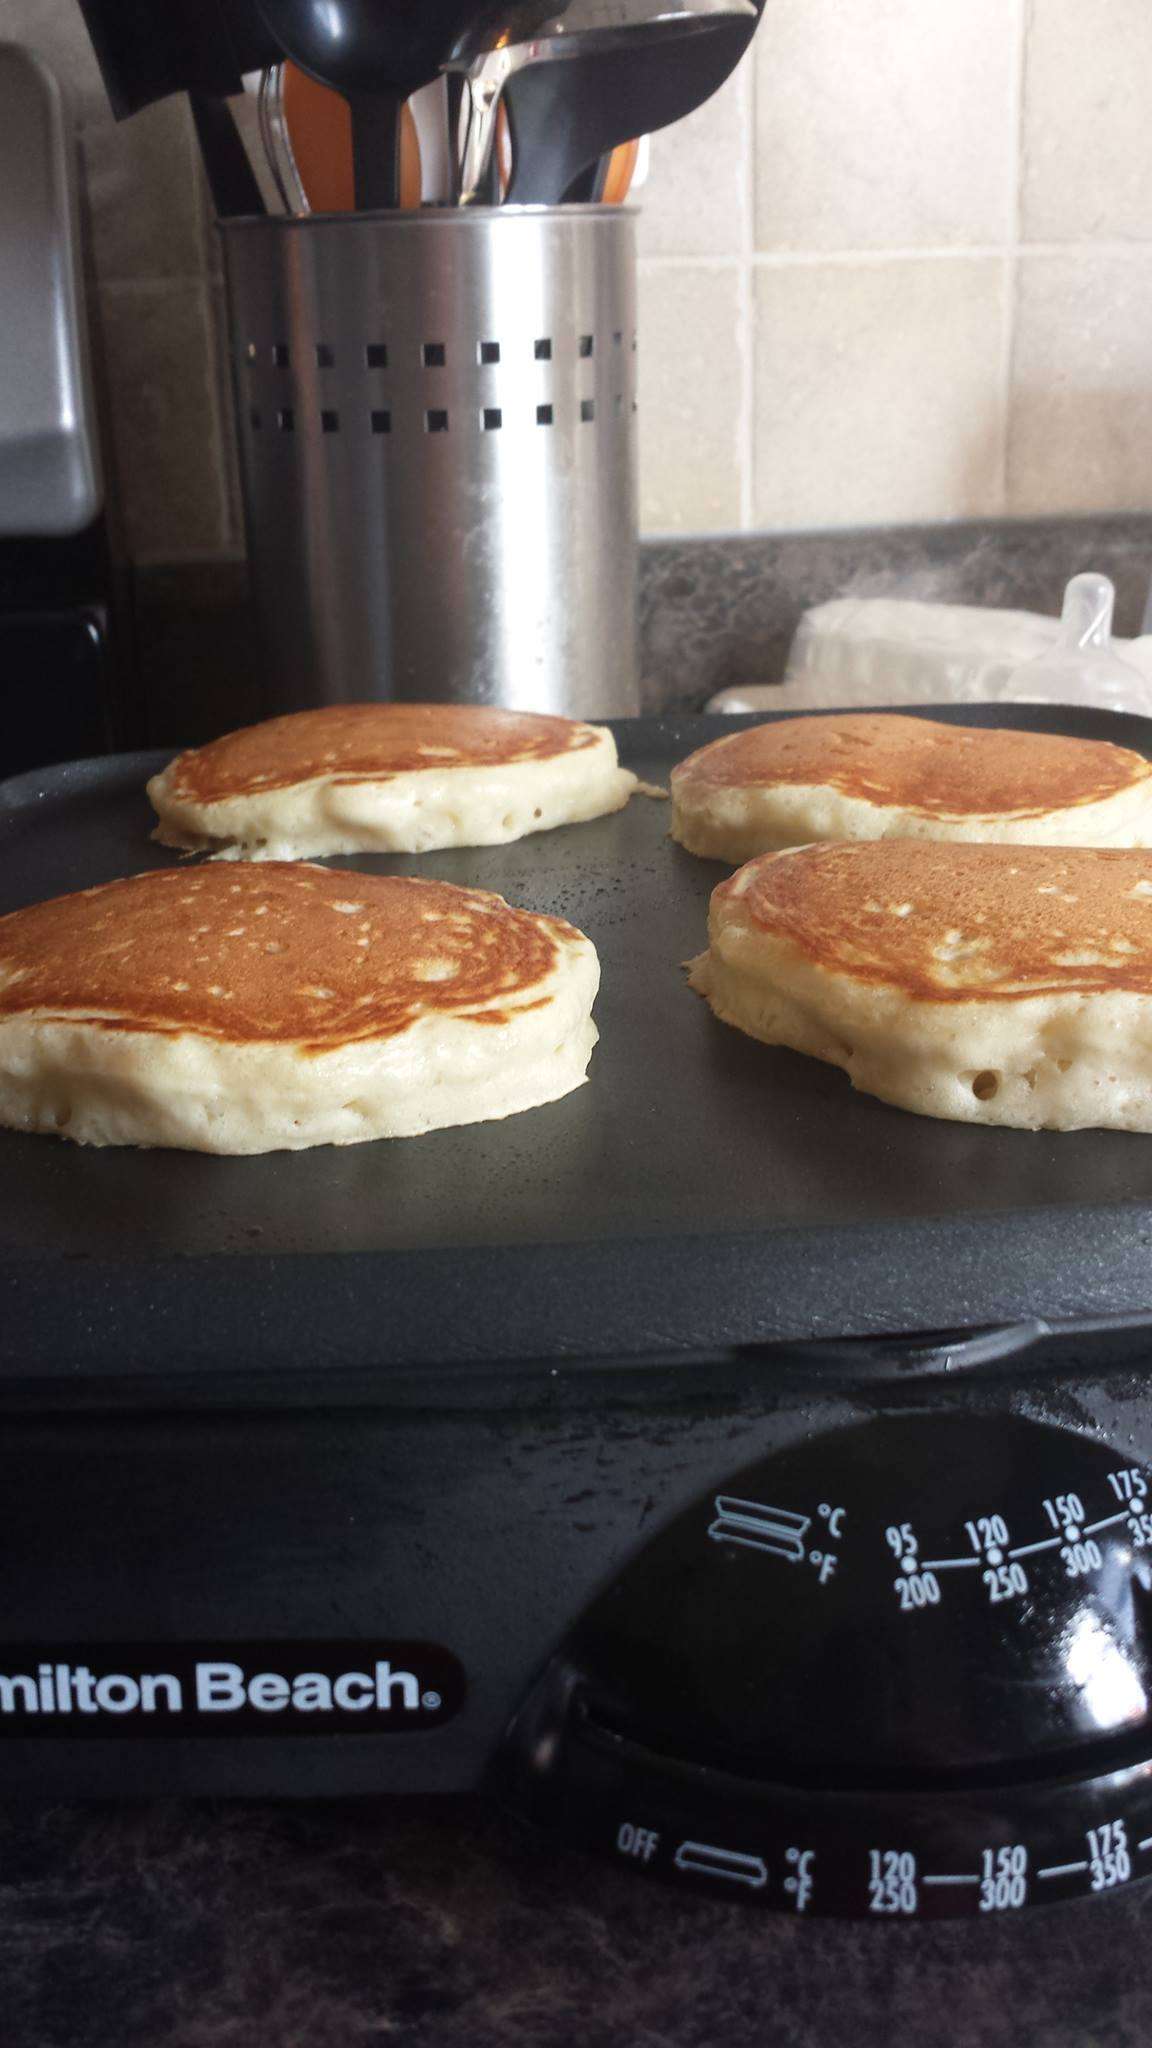 These are absolutely the best home made pancakes we have ever eaten!